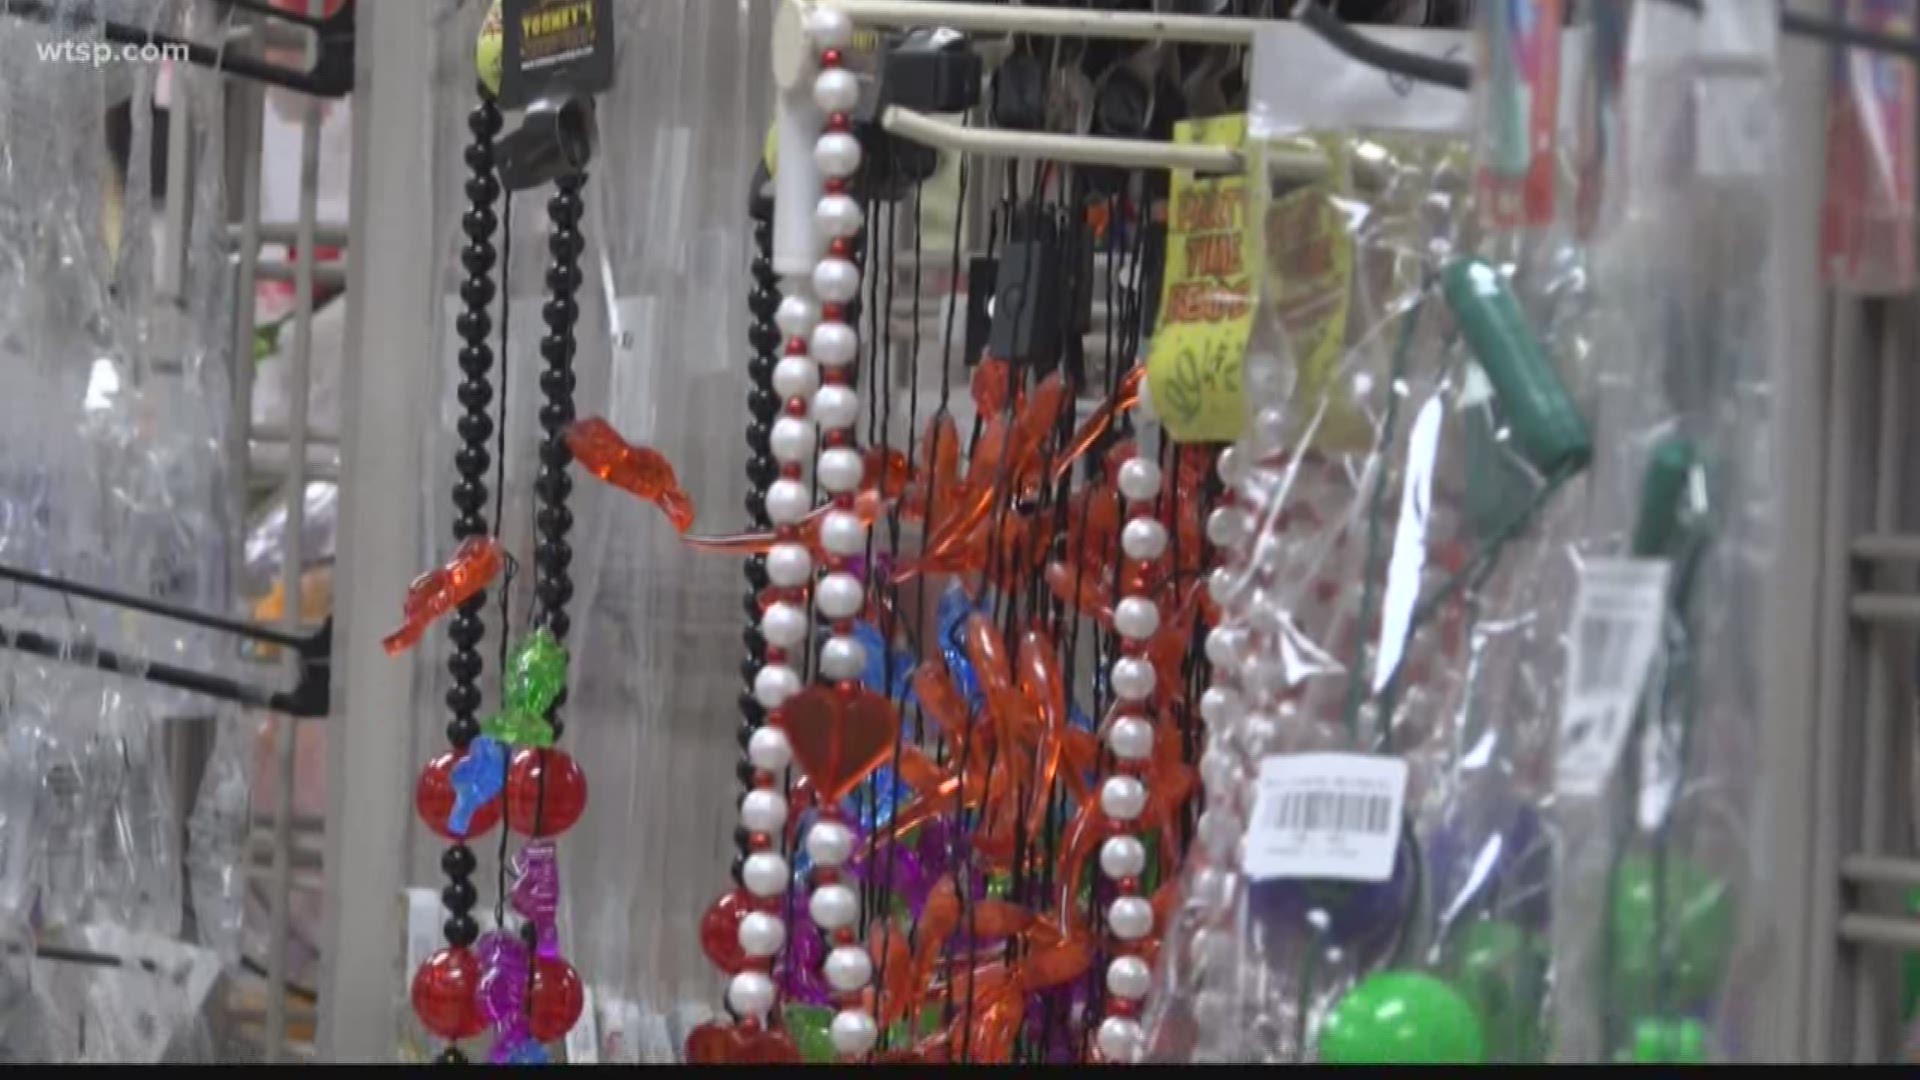 Buccaneer Beads claims to have the largest selection and lowest pricing on Gasparilla beads and party needs in Tampa Bay.